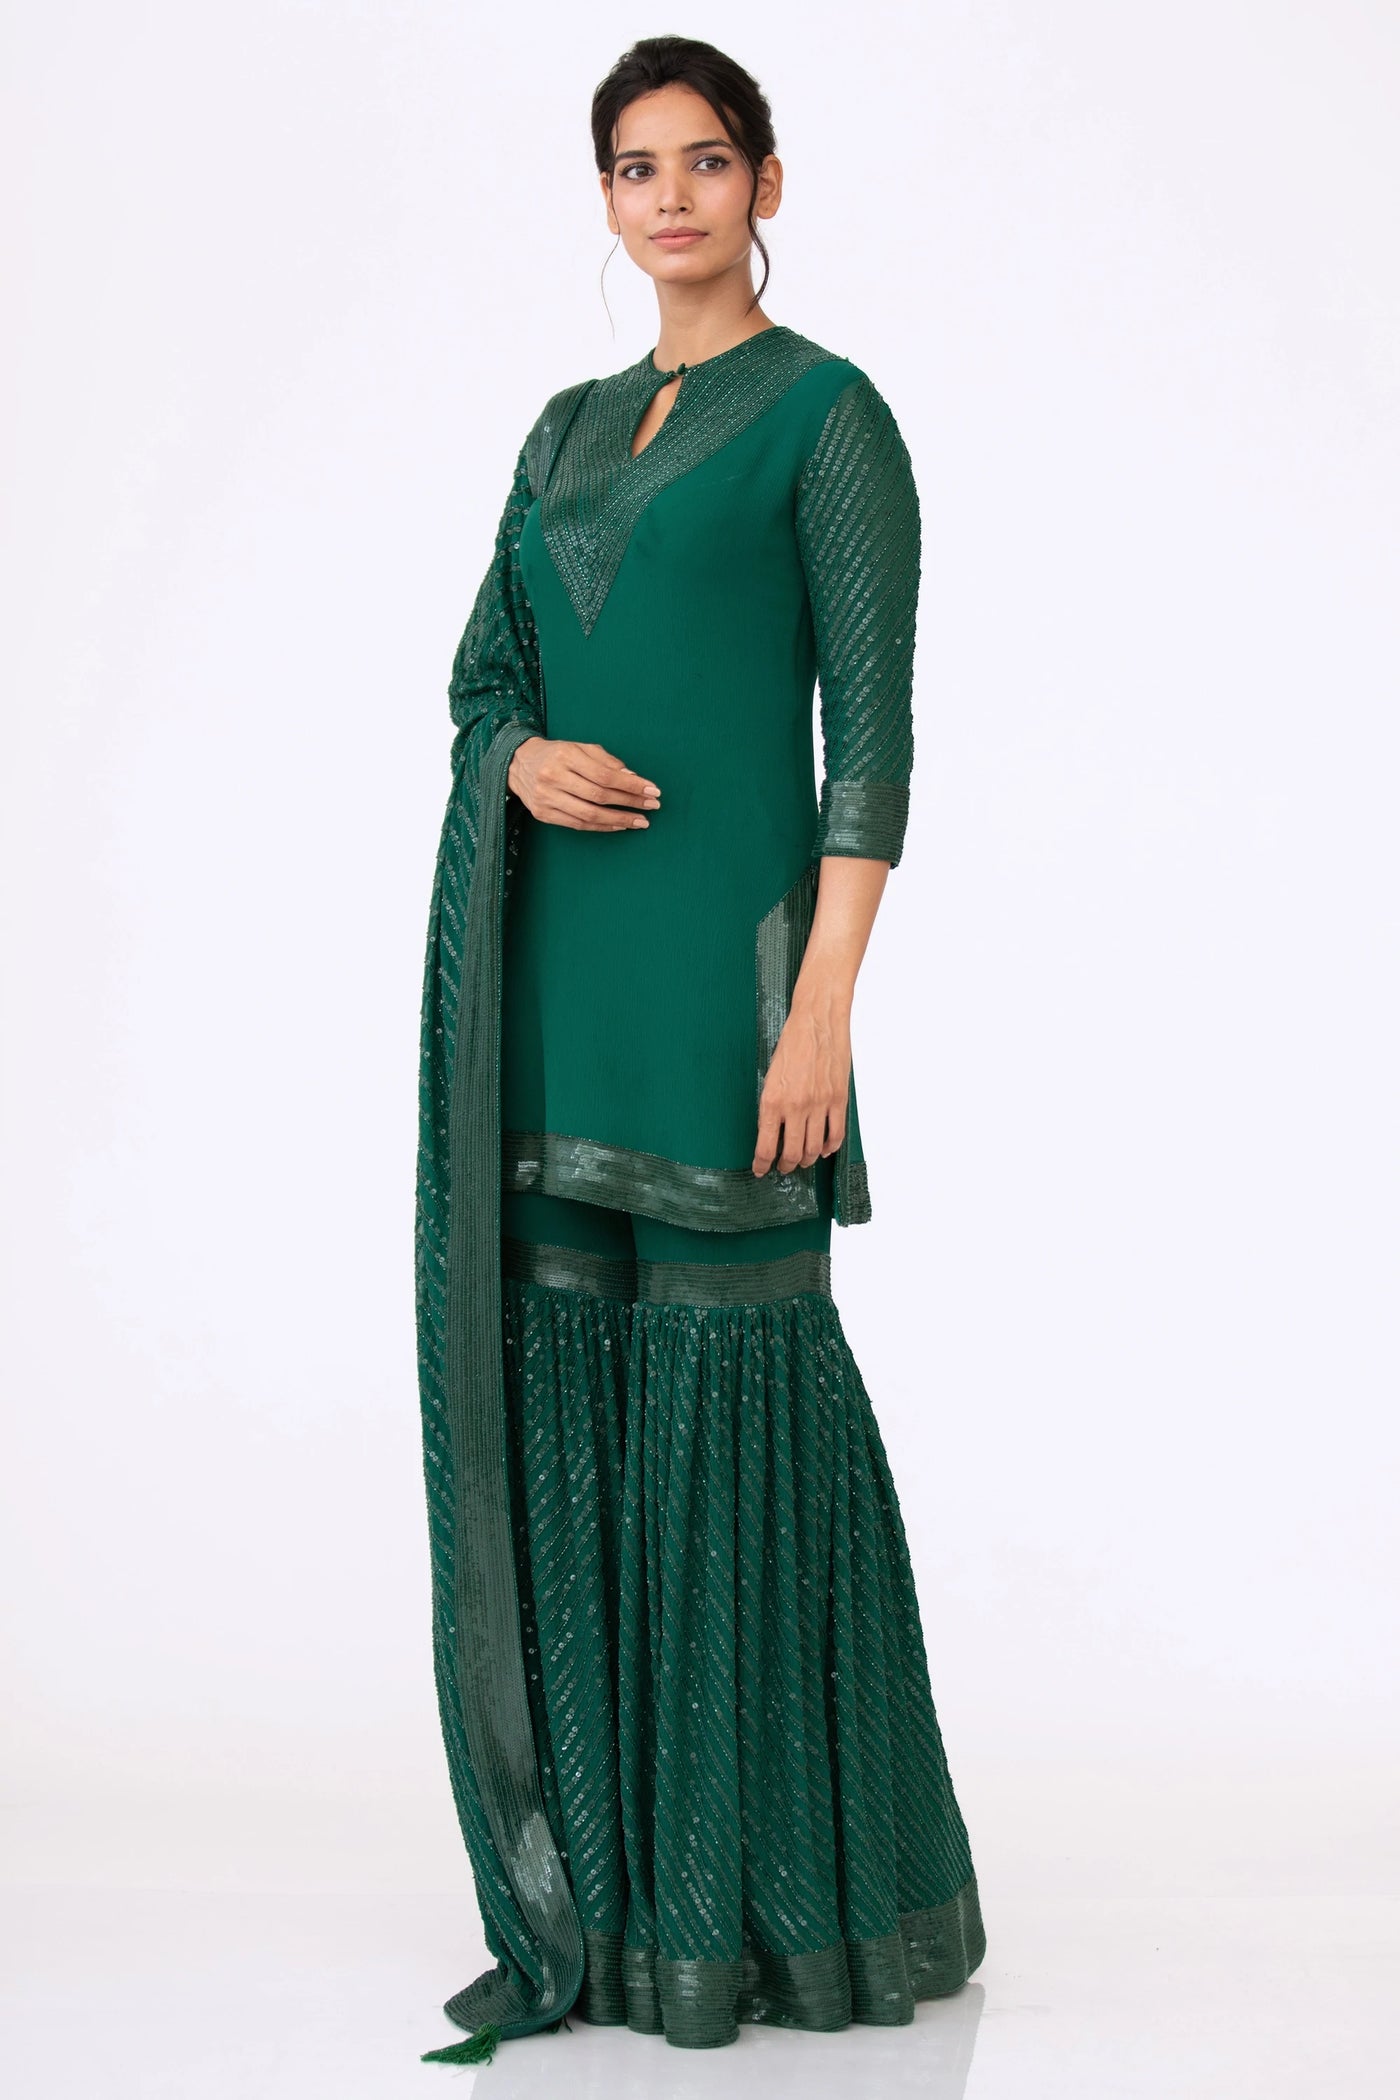 Green Sequins Sharara Set - Indian Clothing in Denver, CO, Aurora, CO, Boulder, CO, Fort Collins, CO, Colorado Springs, CO, Parker, CO, Highlands Ranch, CO, Cherry Creek, CO, Centennial, CO, and Longmont, CO. Nationwide shipping USA - India Fashion X